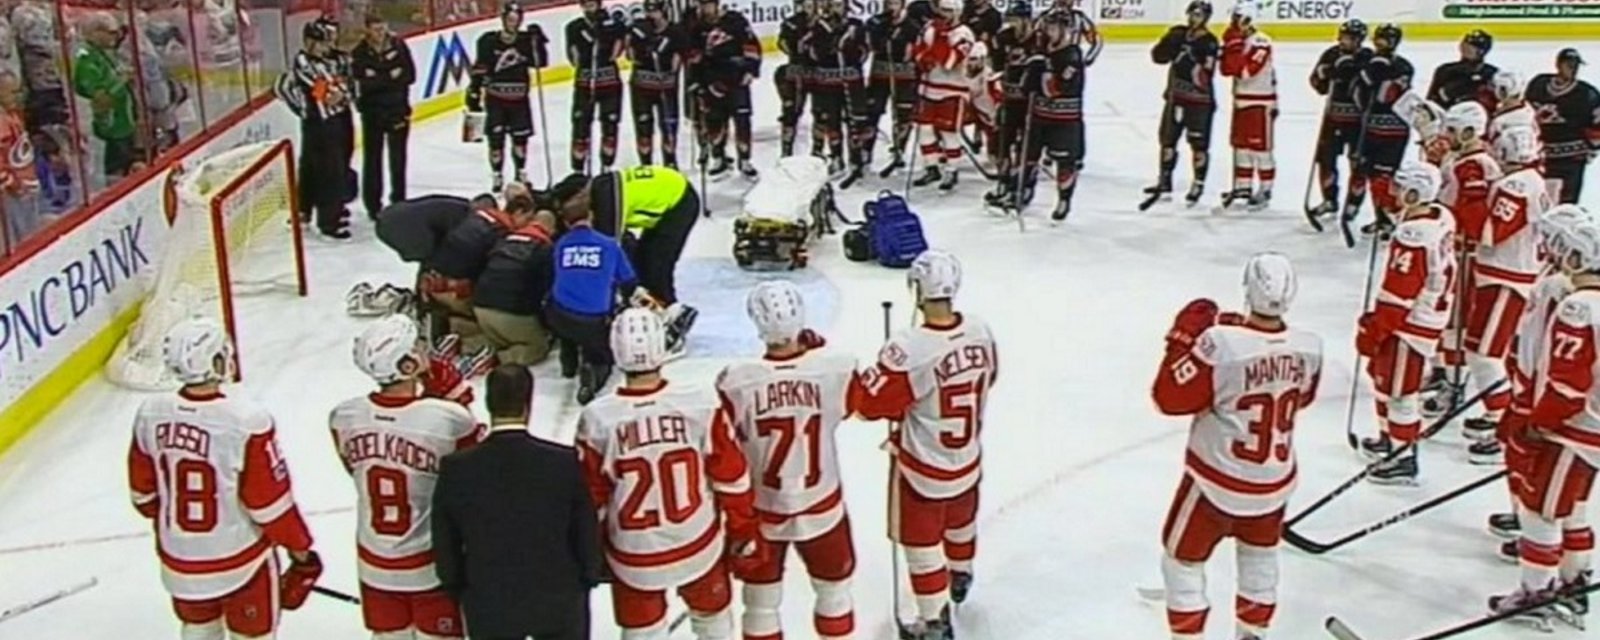 Breaking: Both teams surround the net as stretcher comes out for injured goalie.